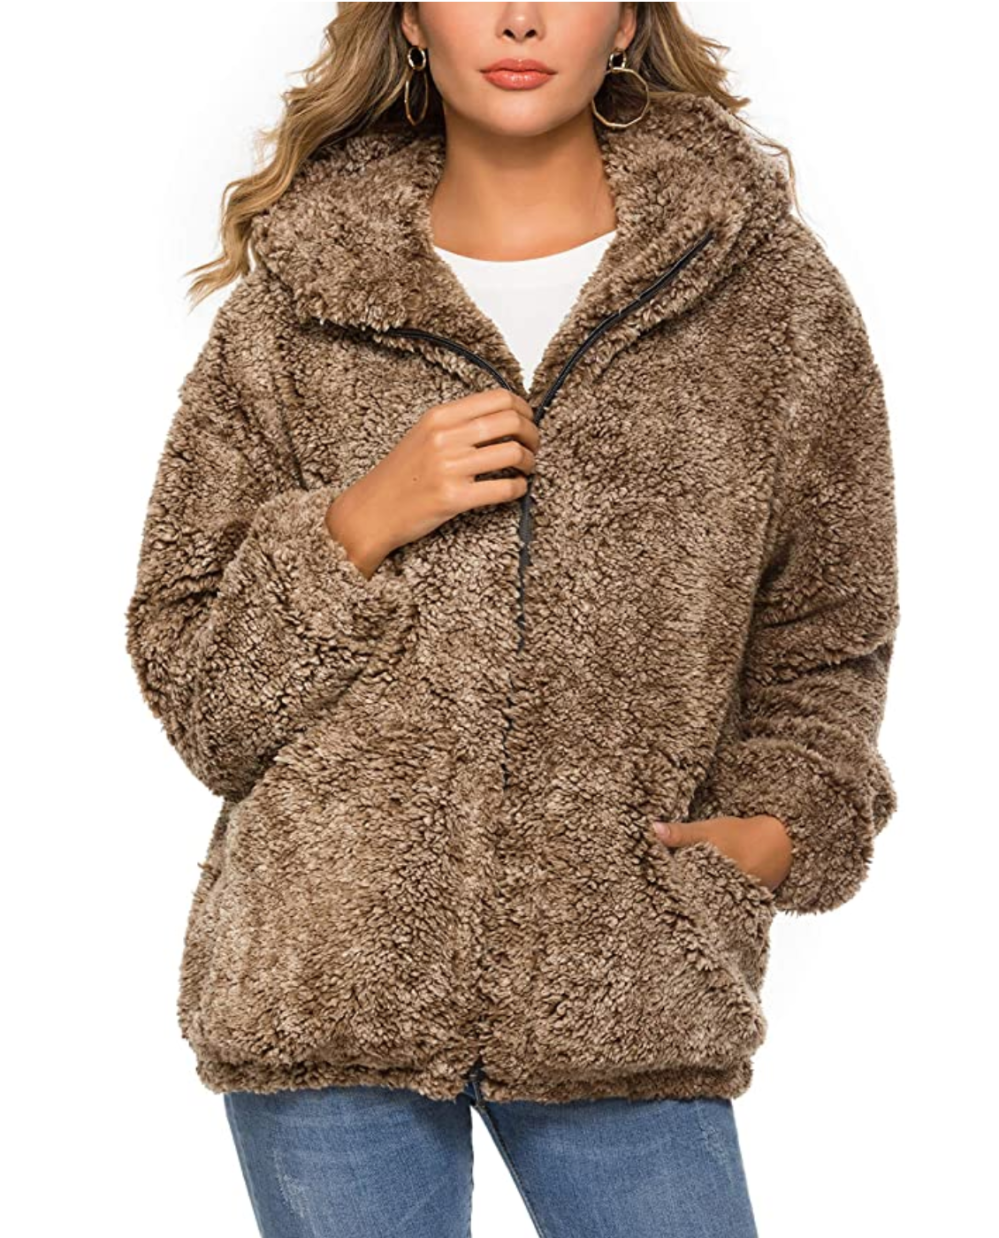 Anrabess Faux-Fur Jacket Is the Perfect Dreamy Winter Coat | UsWeekly